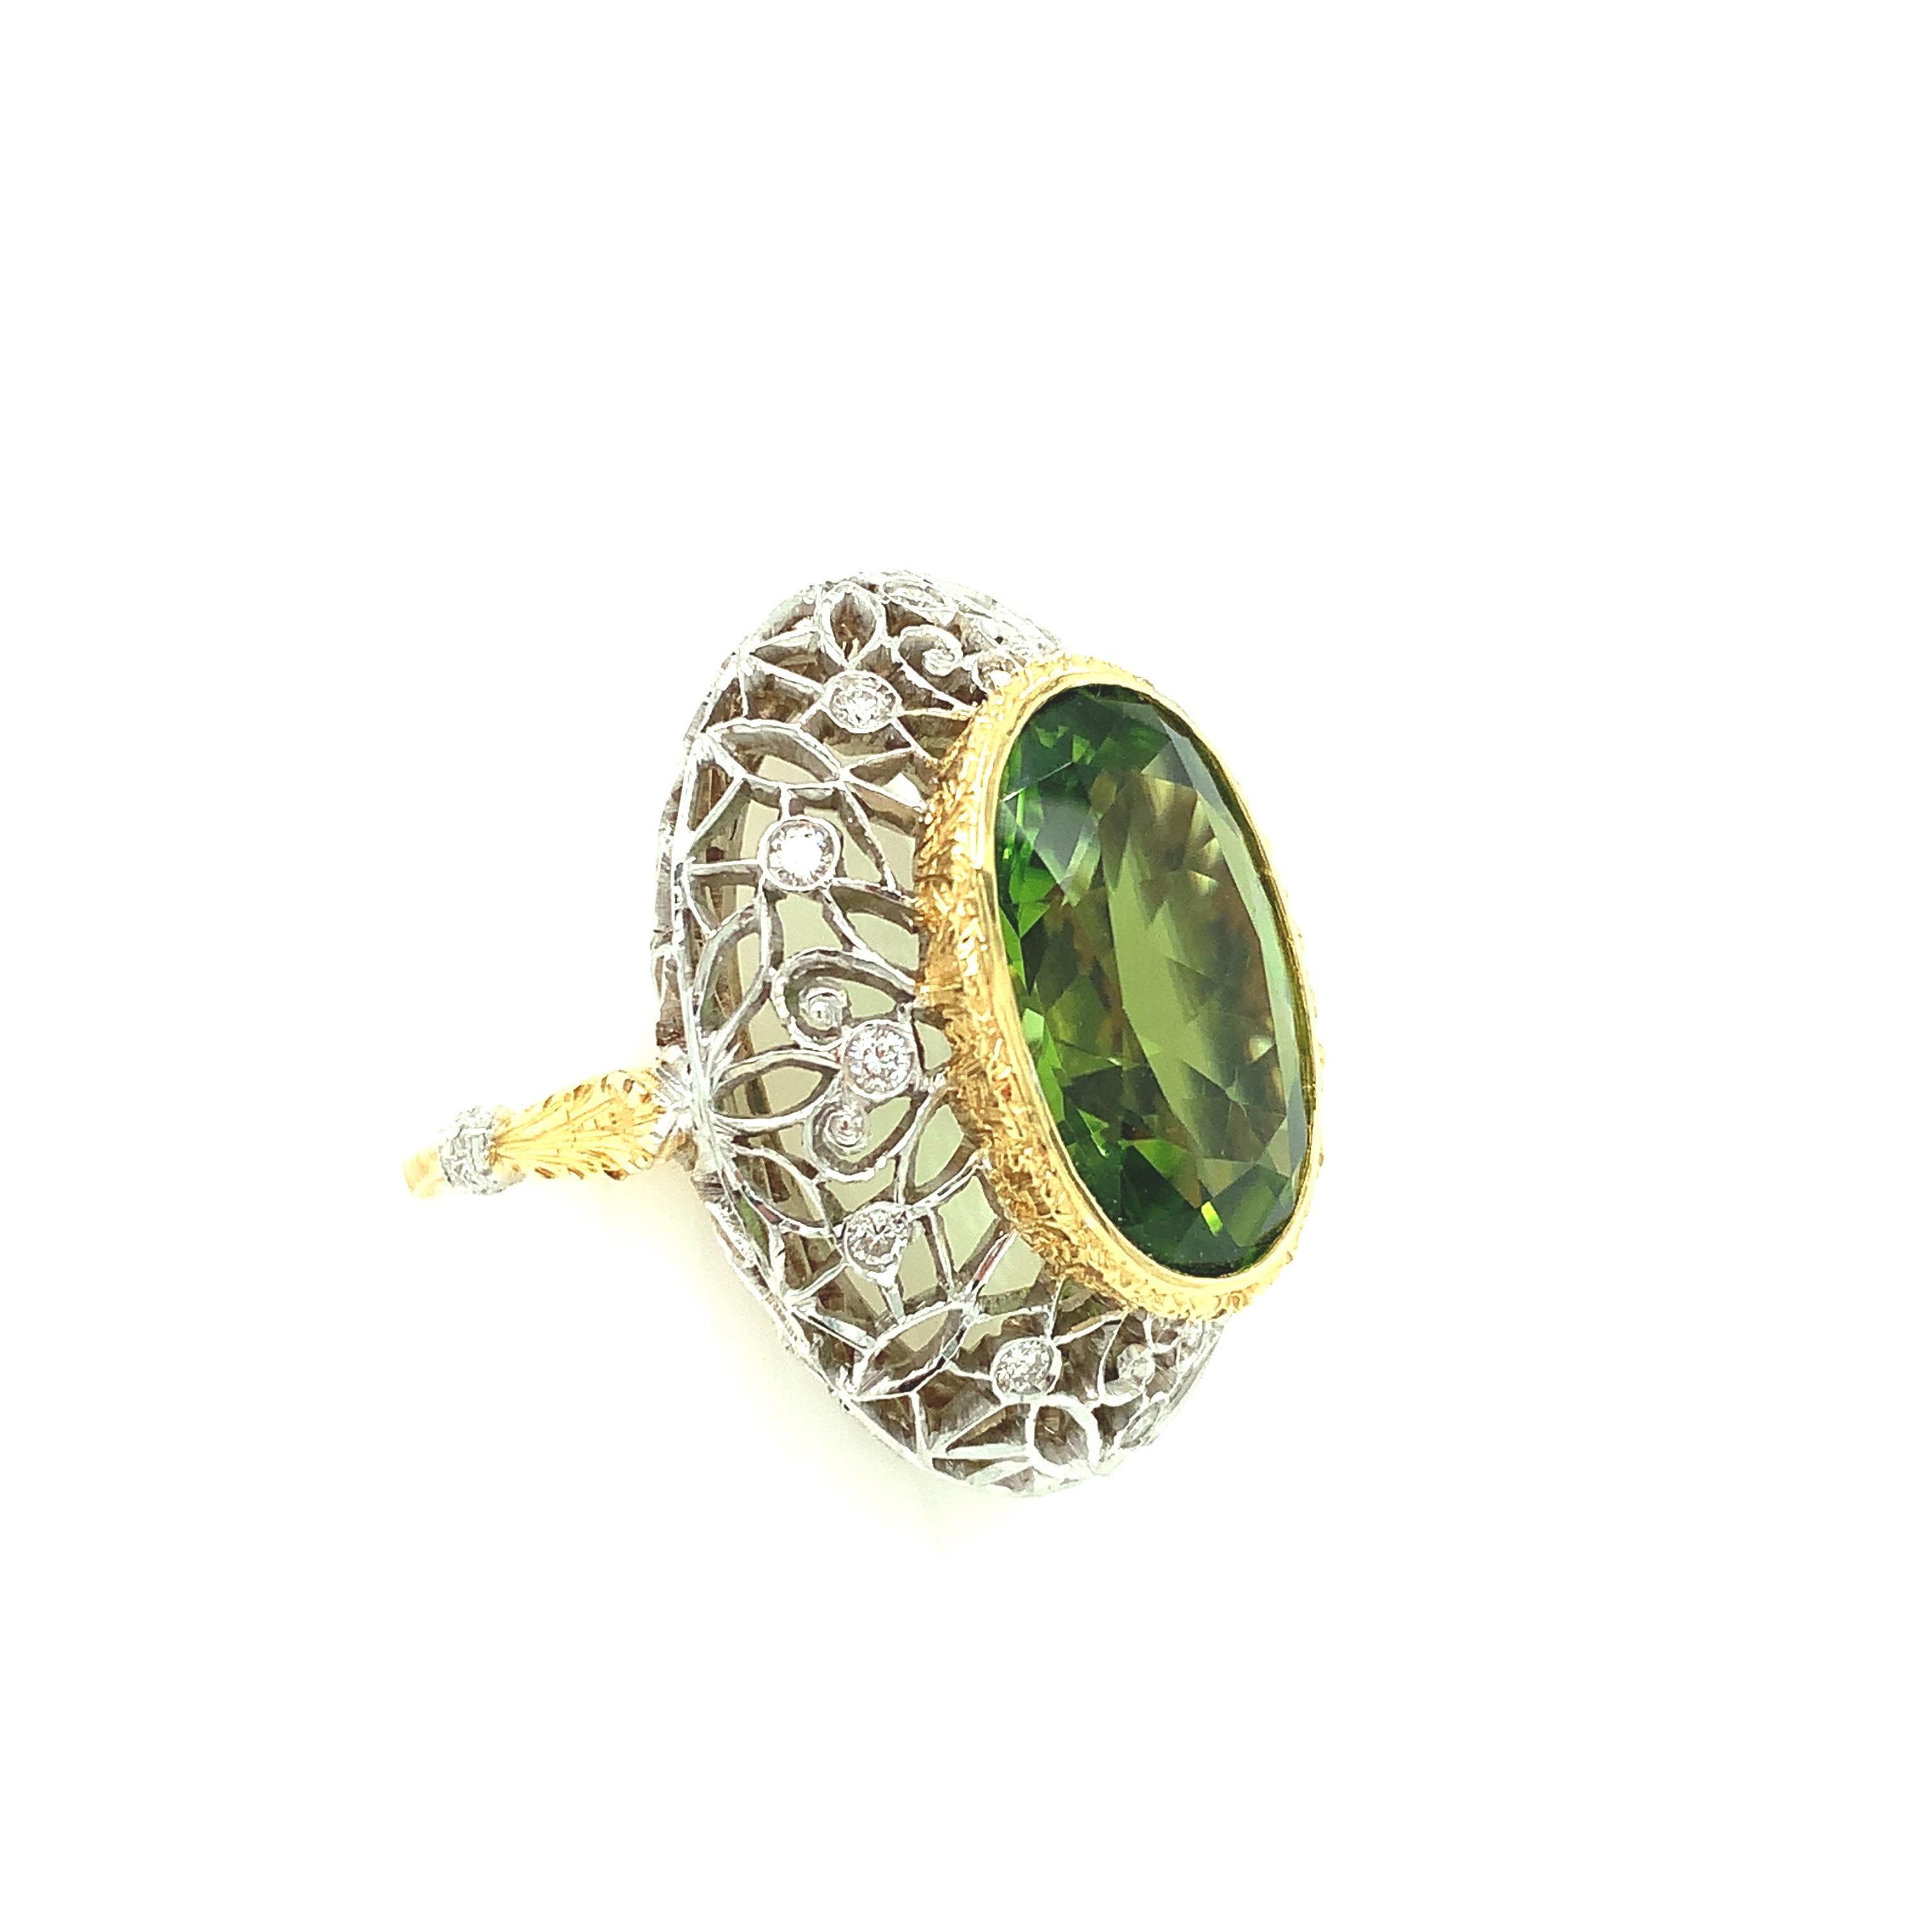 Oval Cut 8.85 Carat Peridot and Diamond Florentine Cocktail Ring in 18k Gold For Sale